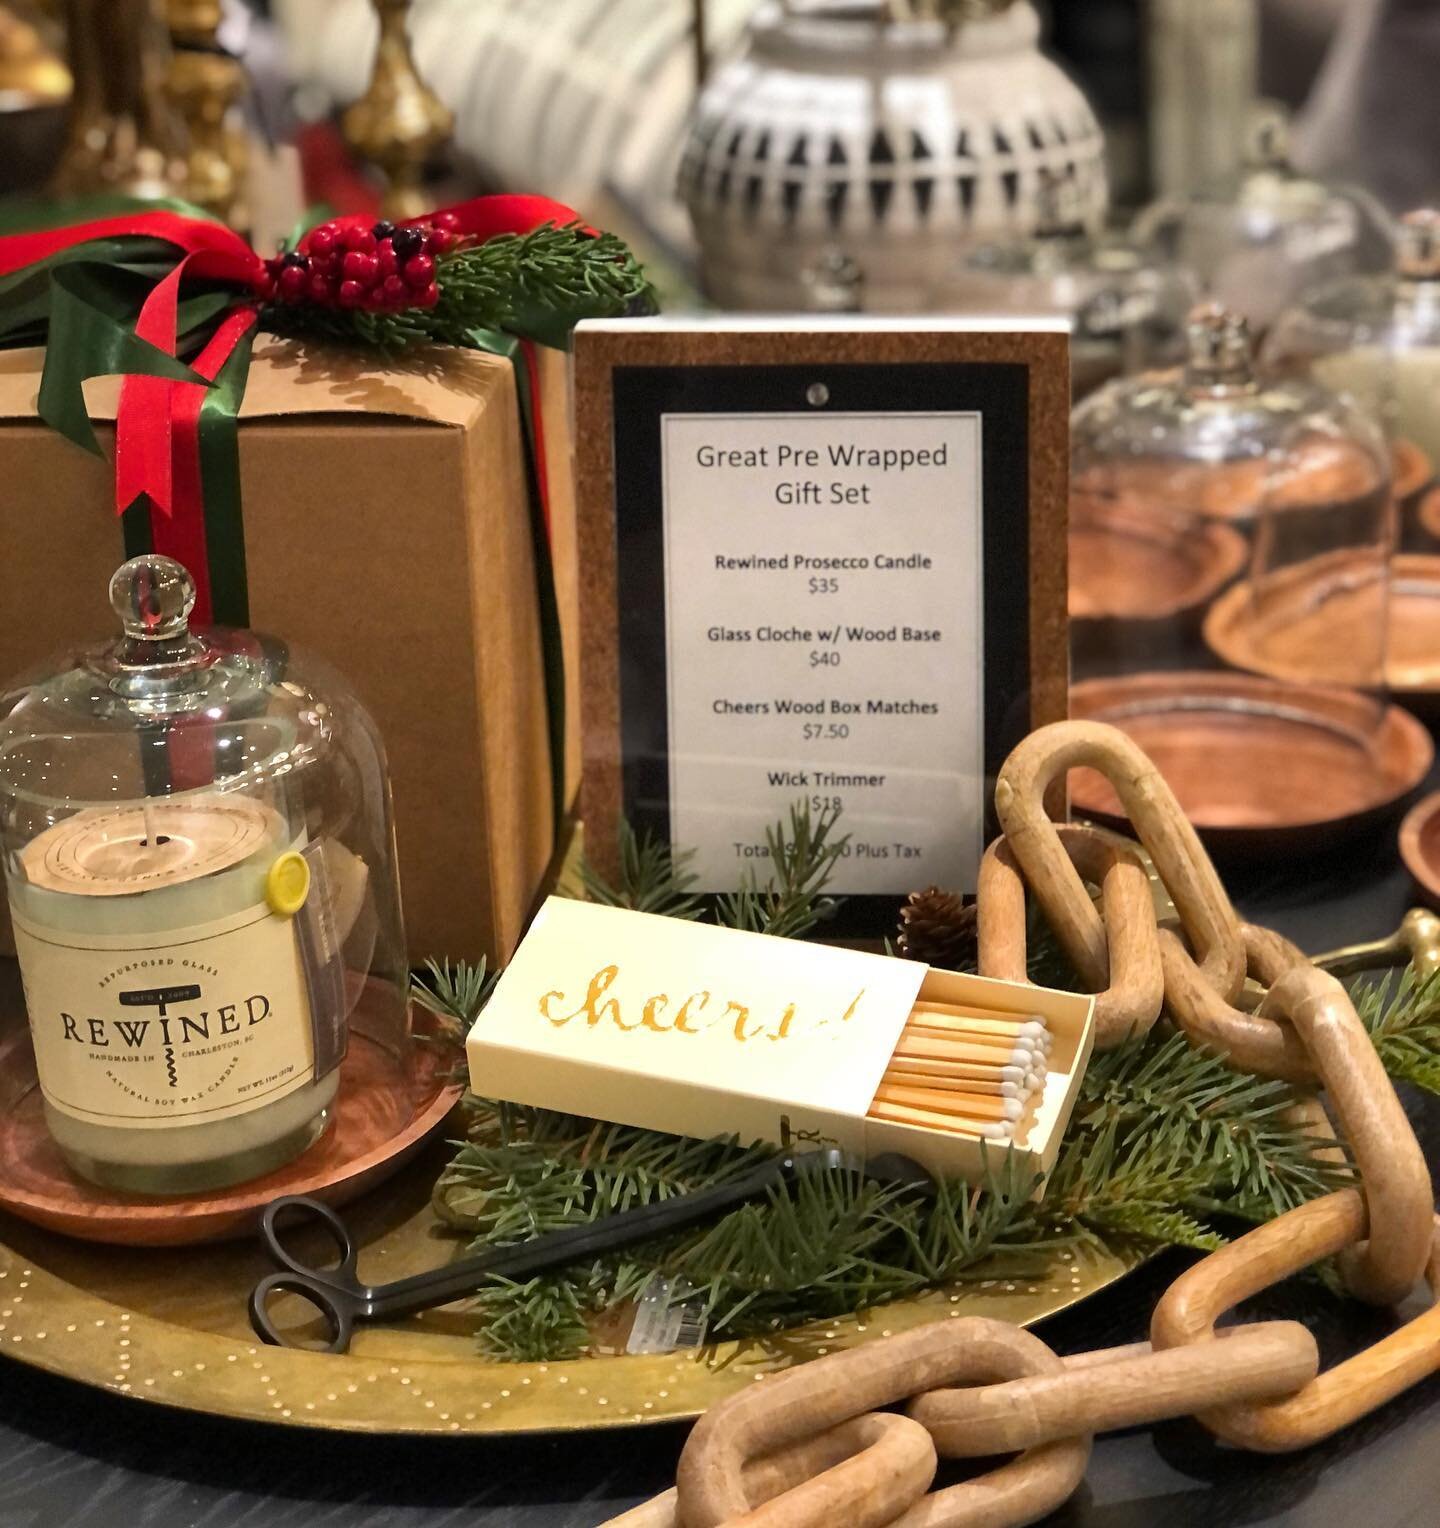 Need a last minute host gift?  We have you covered with a few grab and go pre wrapped gifts. Stop by this weekend Saturday 11-7 and Sunday 12-5! #chicagodesigner #shopchicago #insidehomechicago #interiordesigner